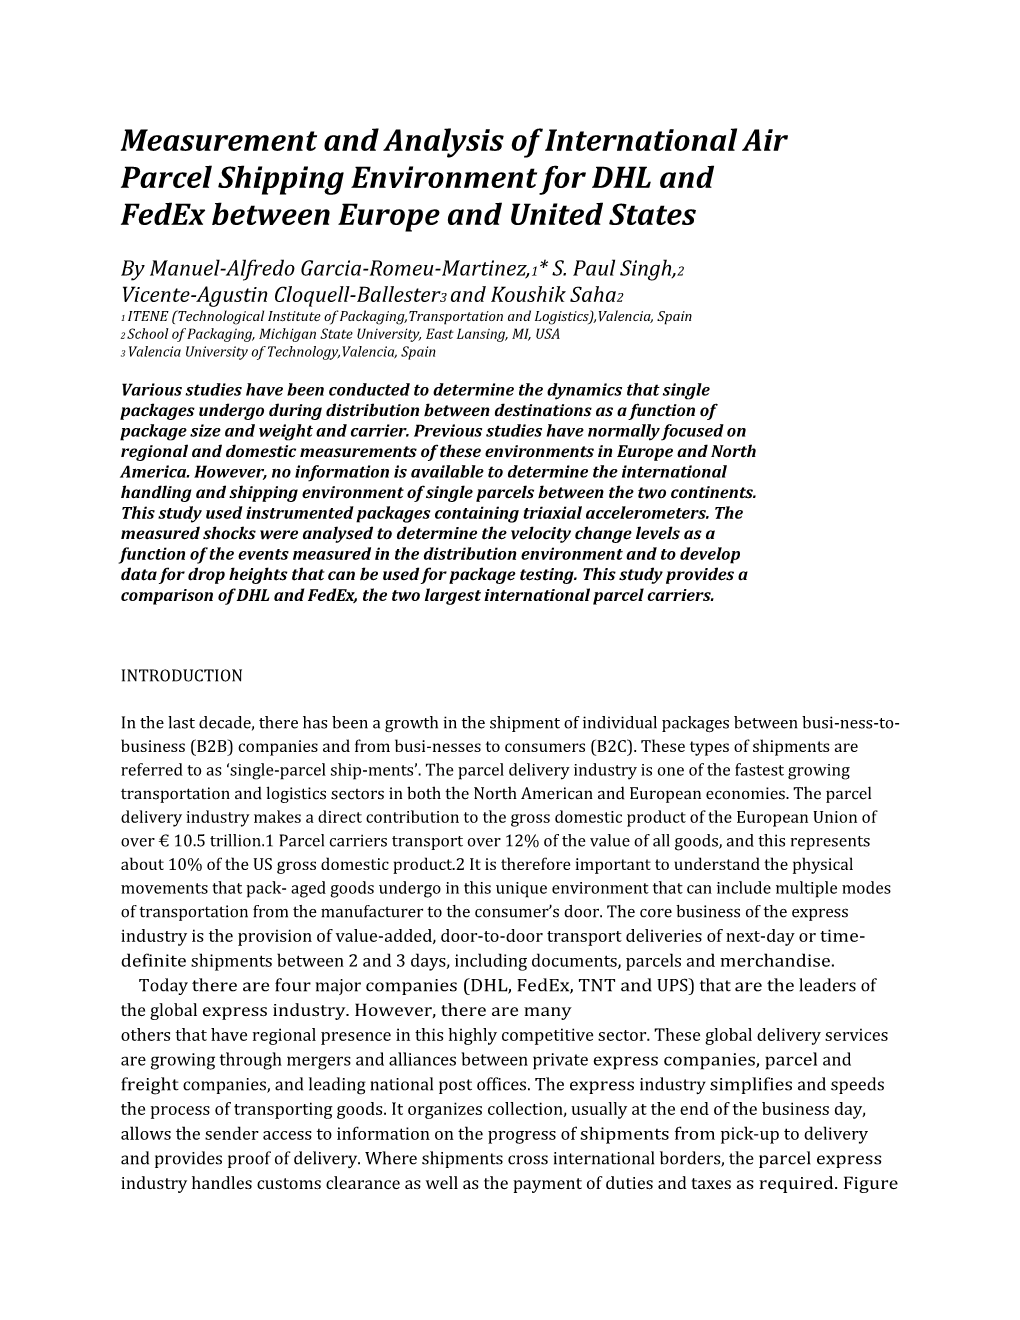 Measurement and Analysis of International Air Parcel Shipping Environment for DHL and Fedex Between Europe and United States